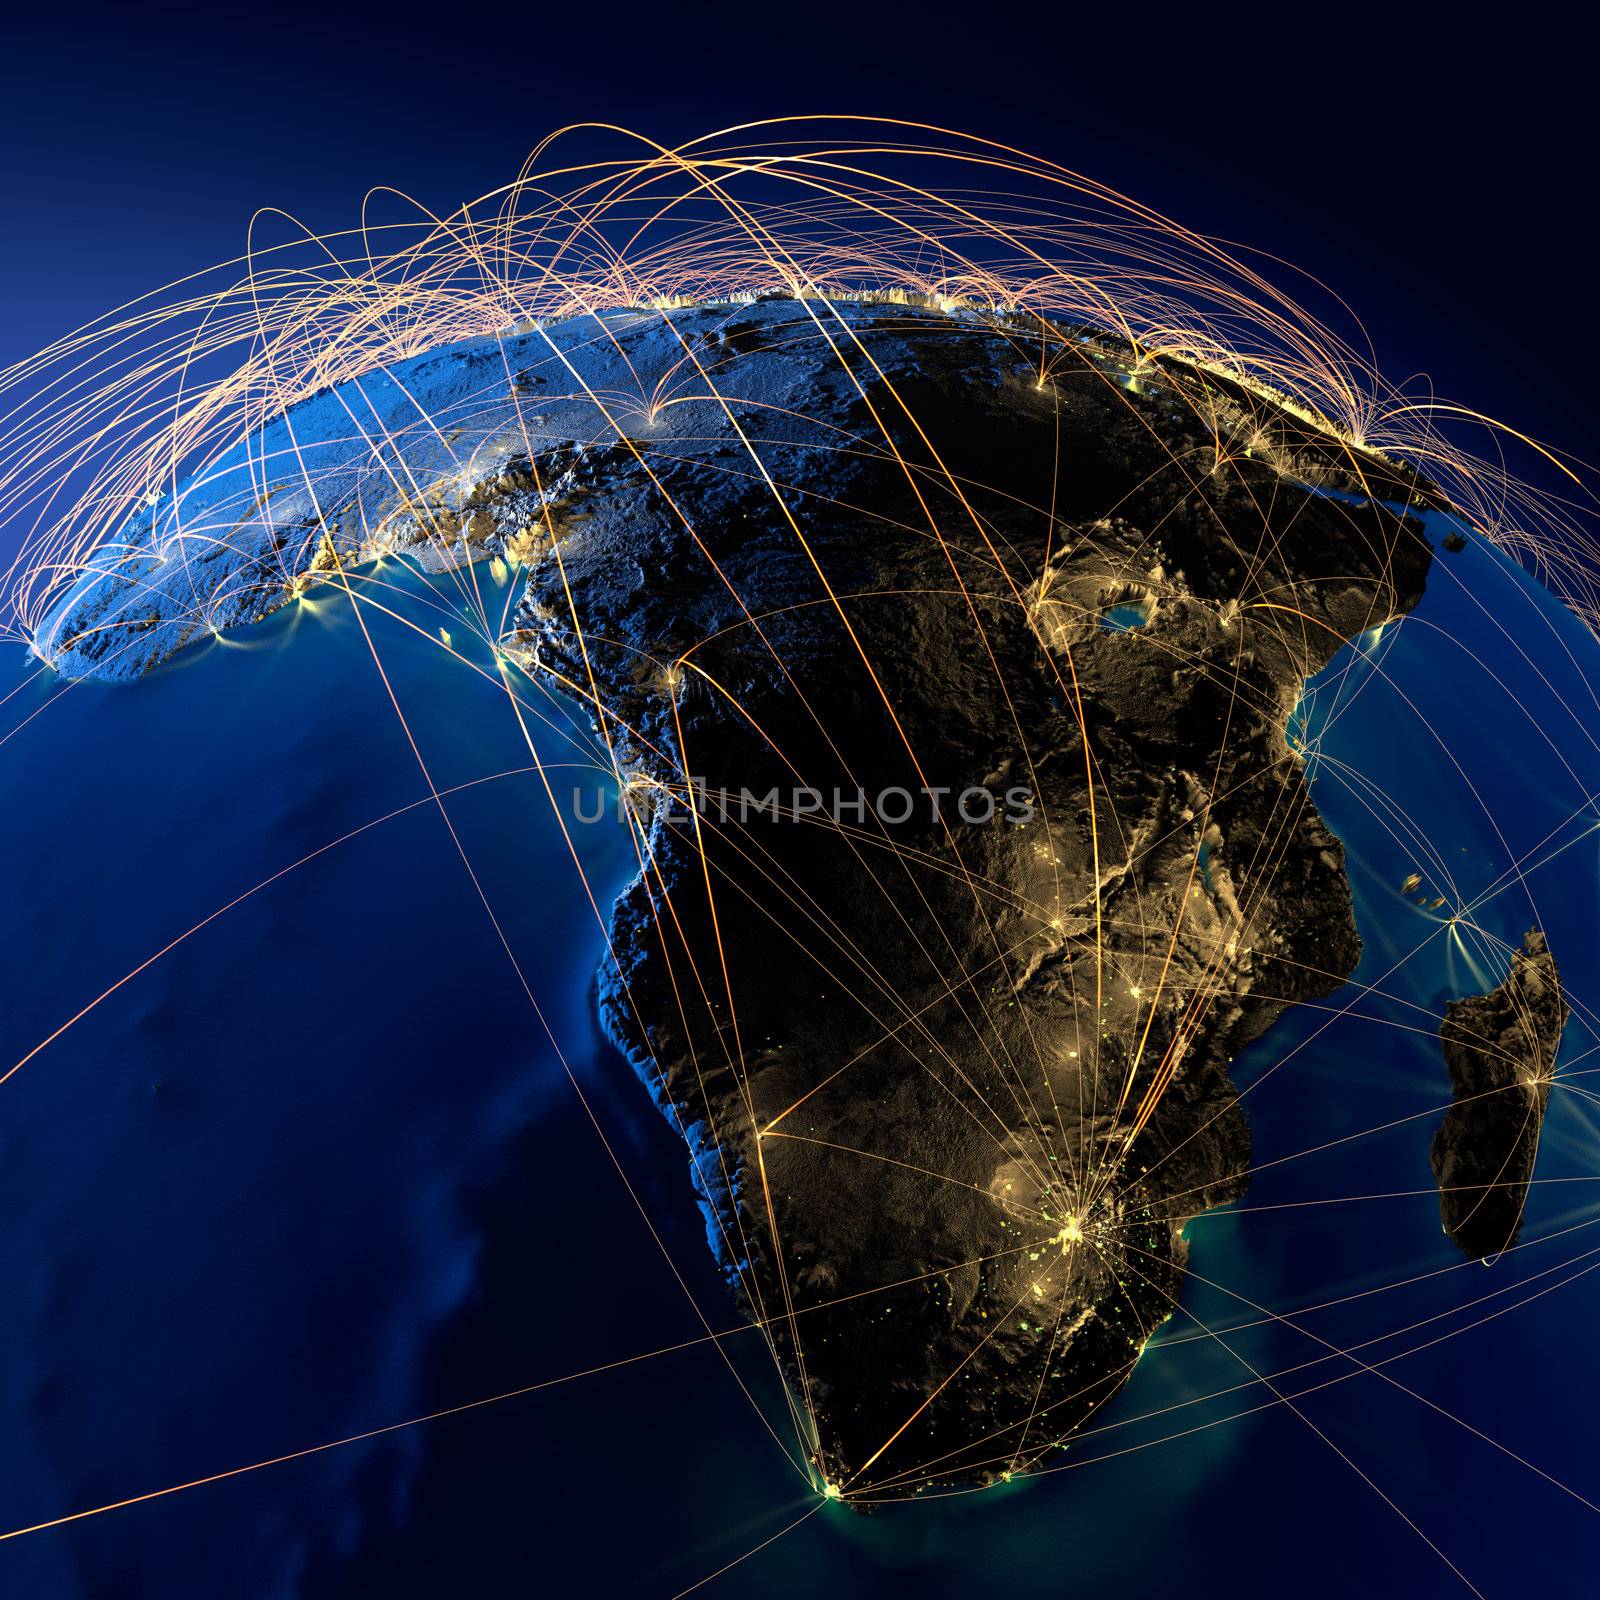 Highly detailed planet Earth at night with embossed continents, illuminated by light of cities, translucent and reflective ocean. Earth is surrounded by a luminous network, representing the major air routes based on real data